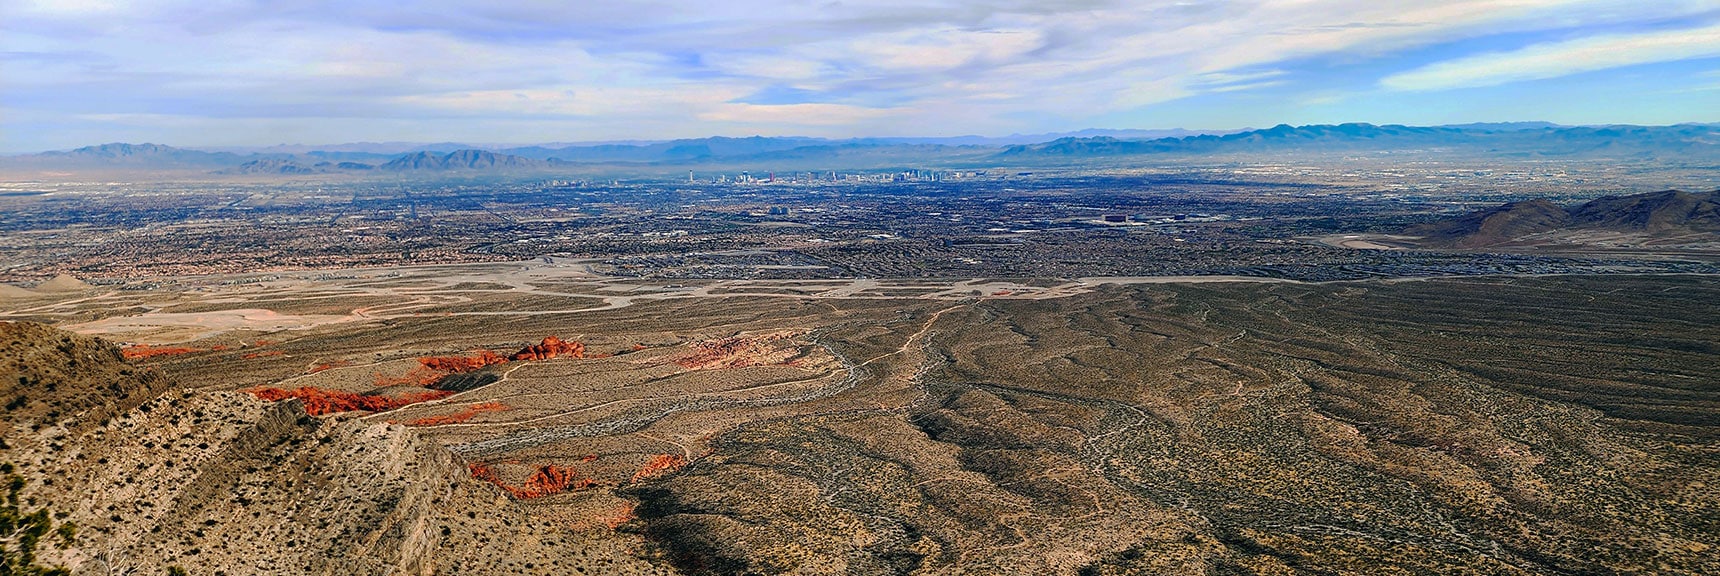 Little Red Rock (left). Growth Edge and South Vegas Valley Beyond | Damsel Peak Southeastern Slope | Calico & Brownstone Basins, Nevada